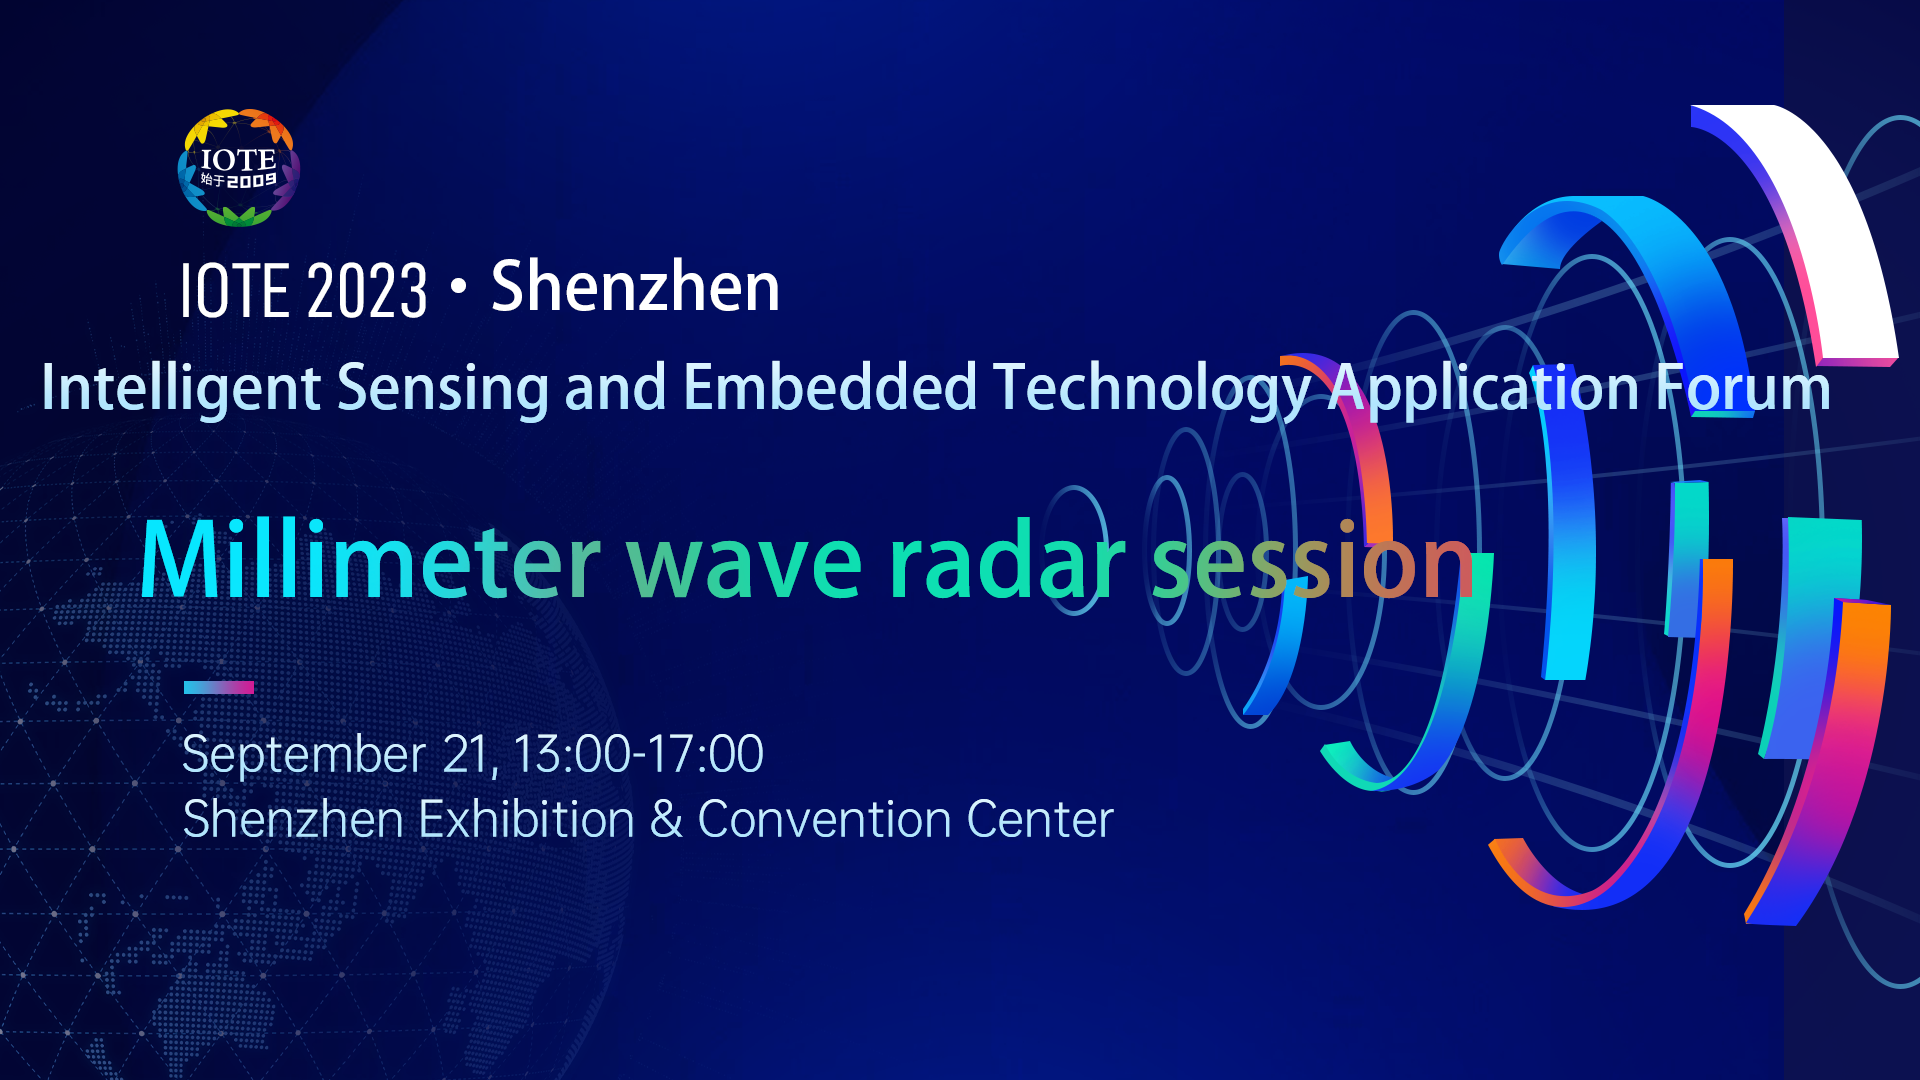 Smart Sensing and Embedded Technology Application Summit Forum - Millimeter Wave Radar Session (IOTE-IoT Expo China)